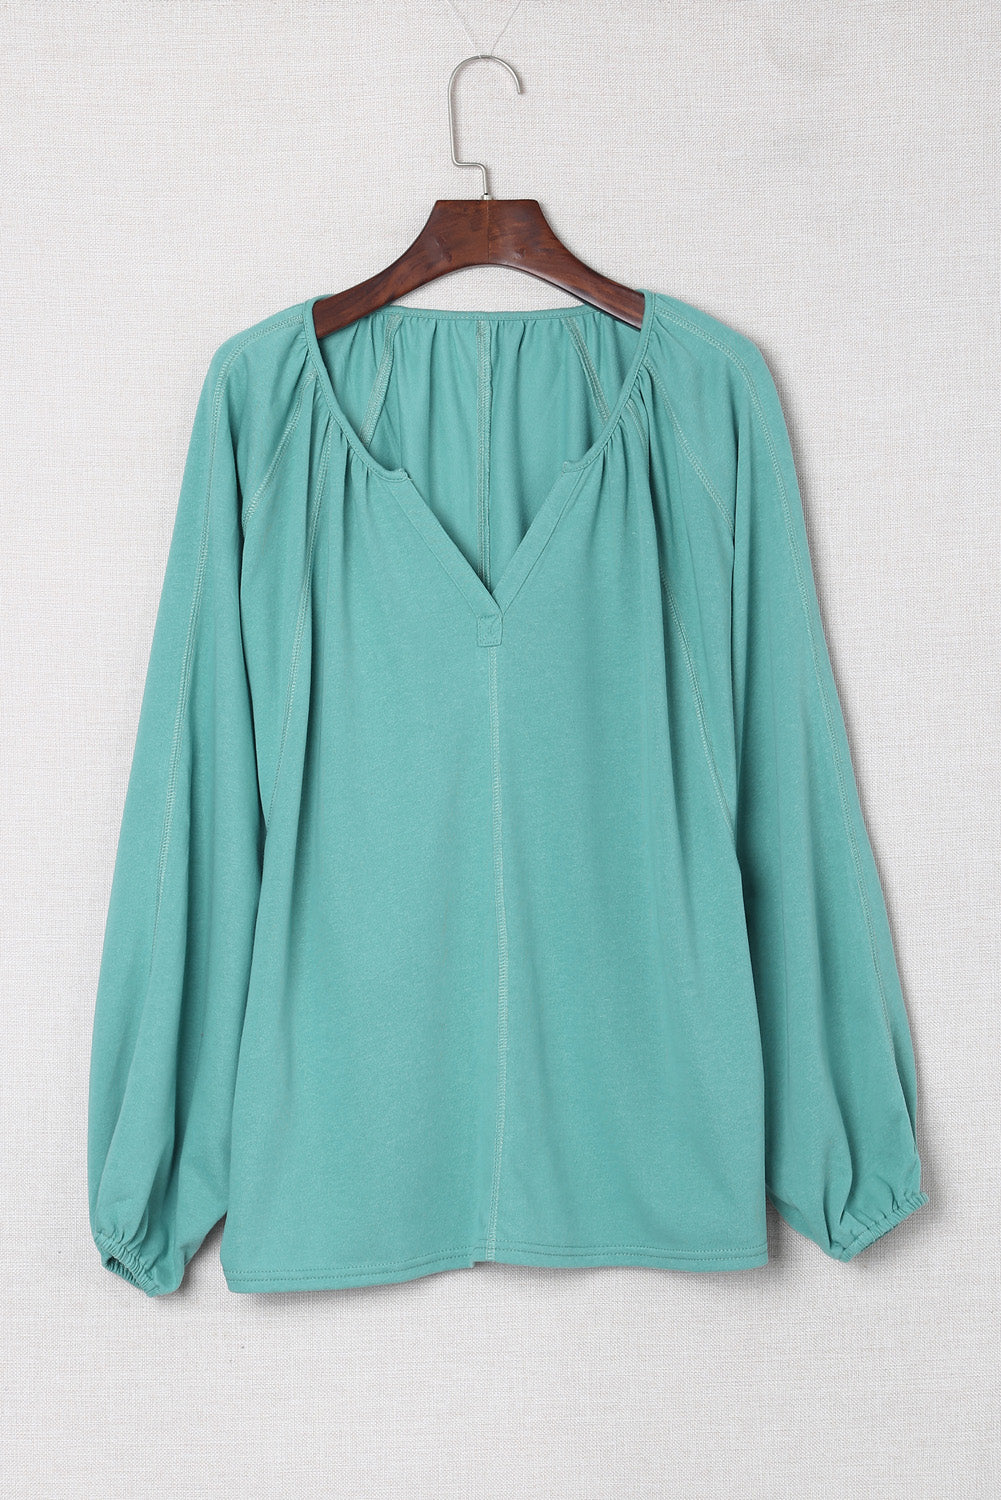 Women's Green Casual Plicated Detail V Neck Blouse